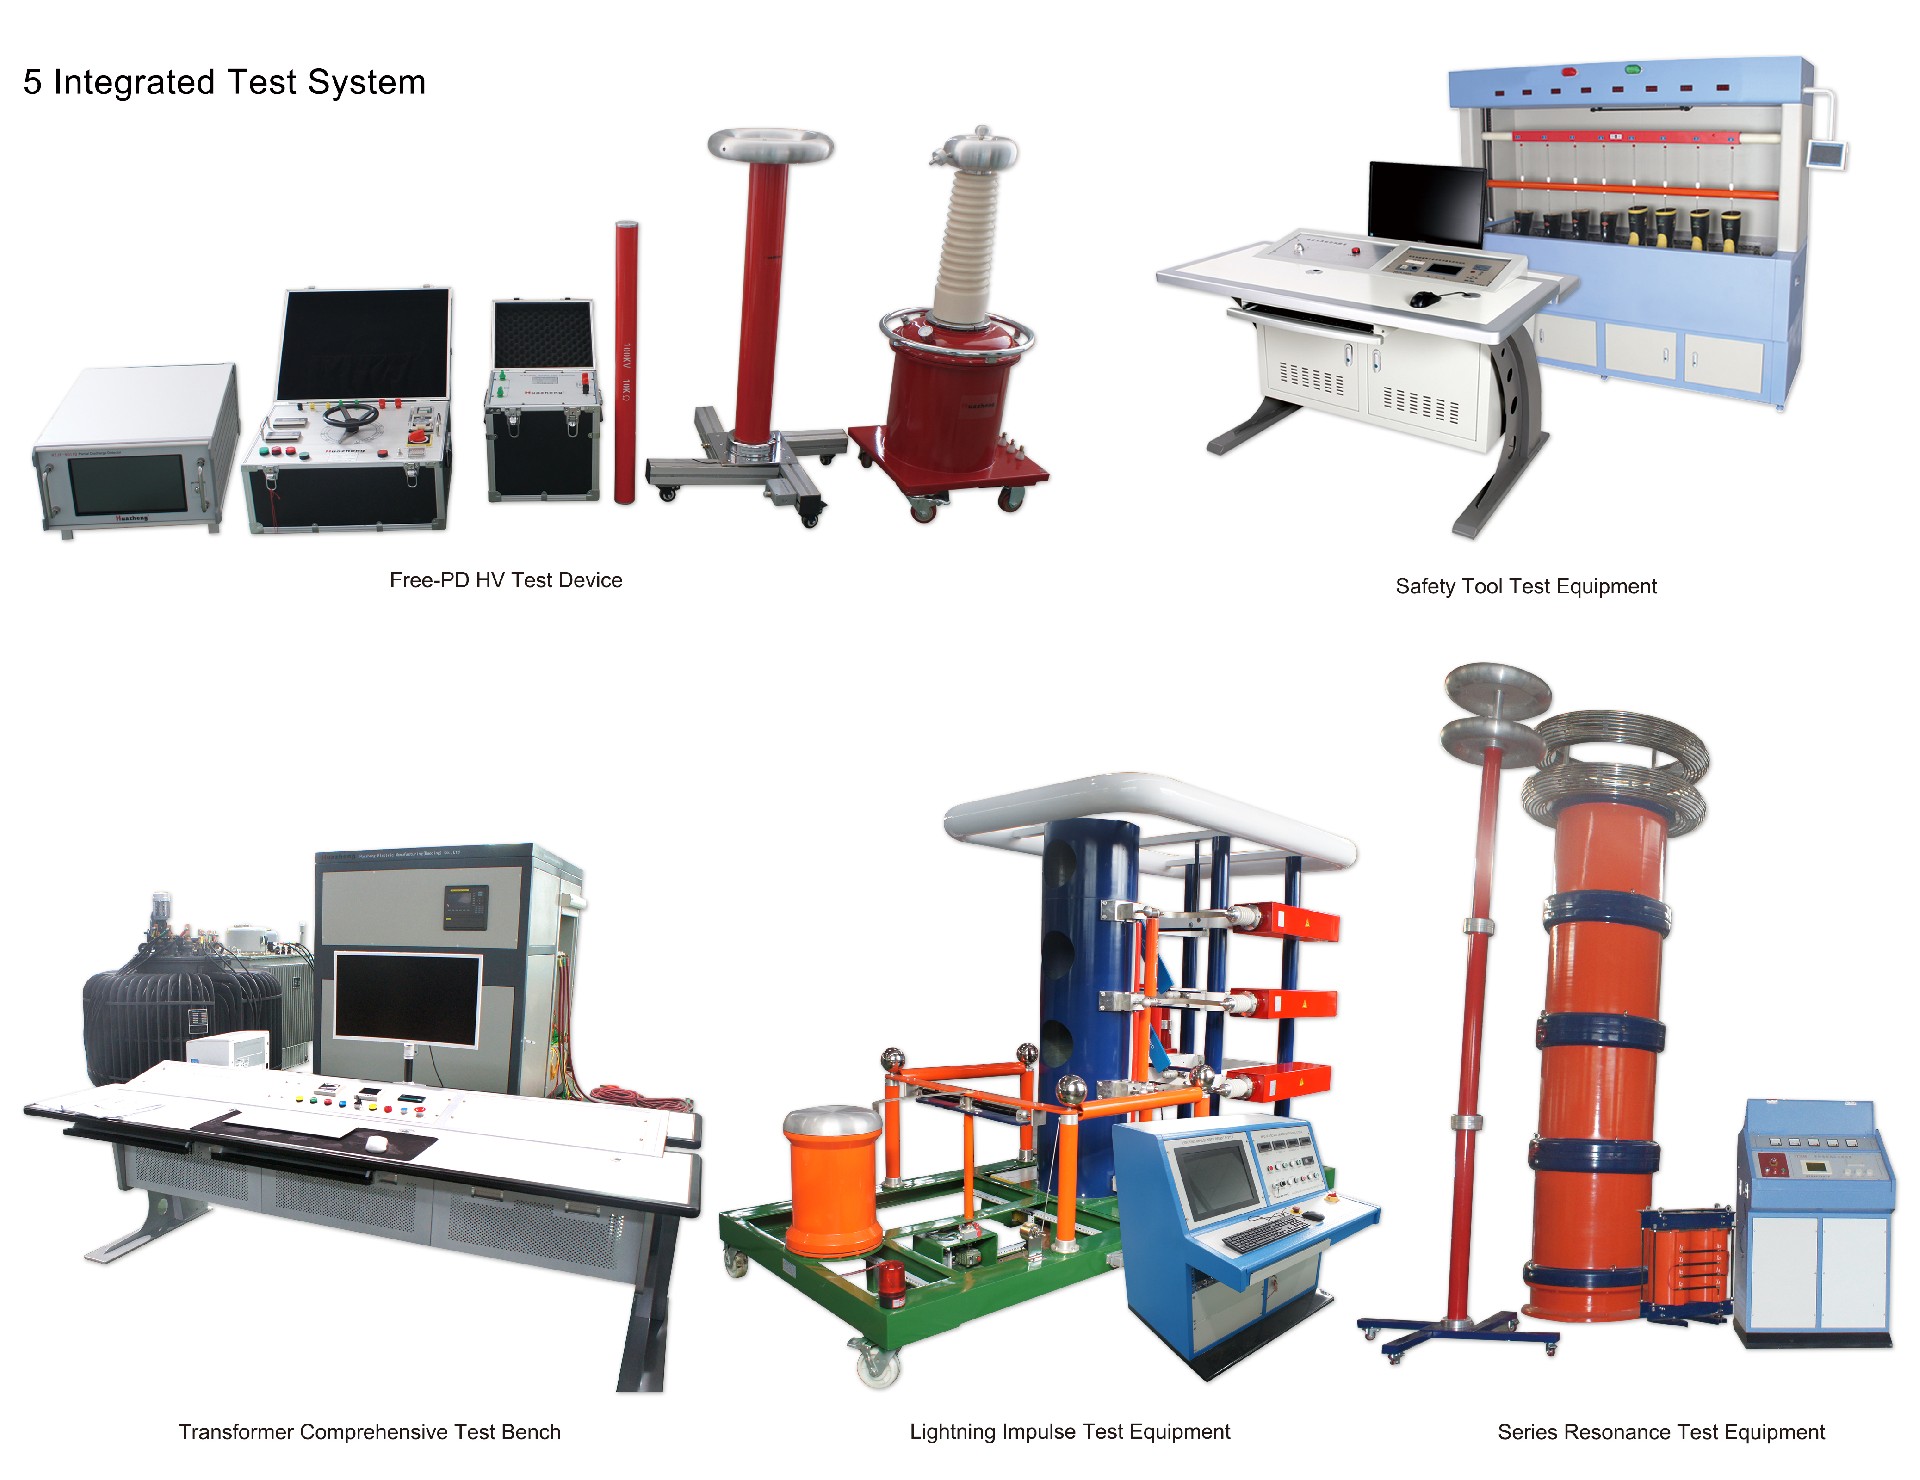 Huazheng Electric Manufacturer-The specialist of Electric test equipments